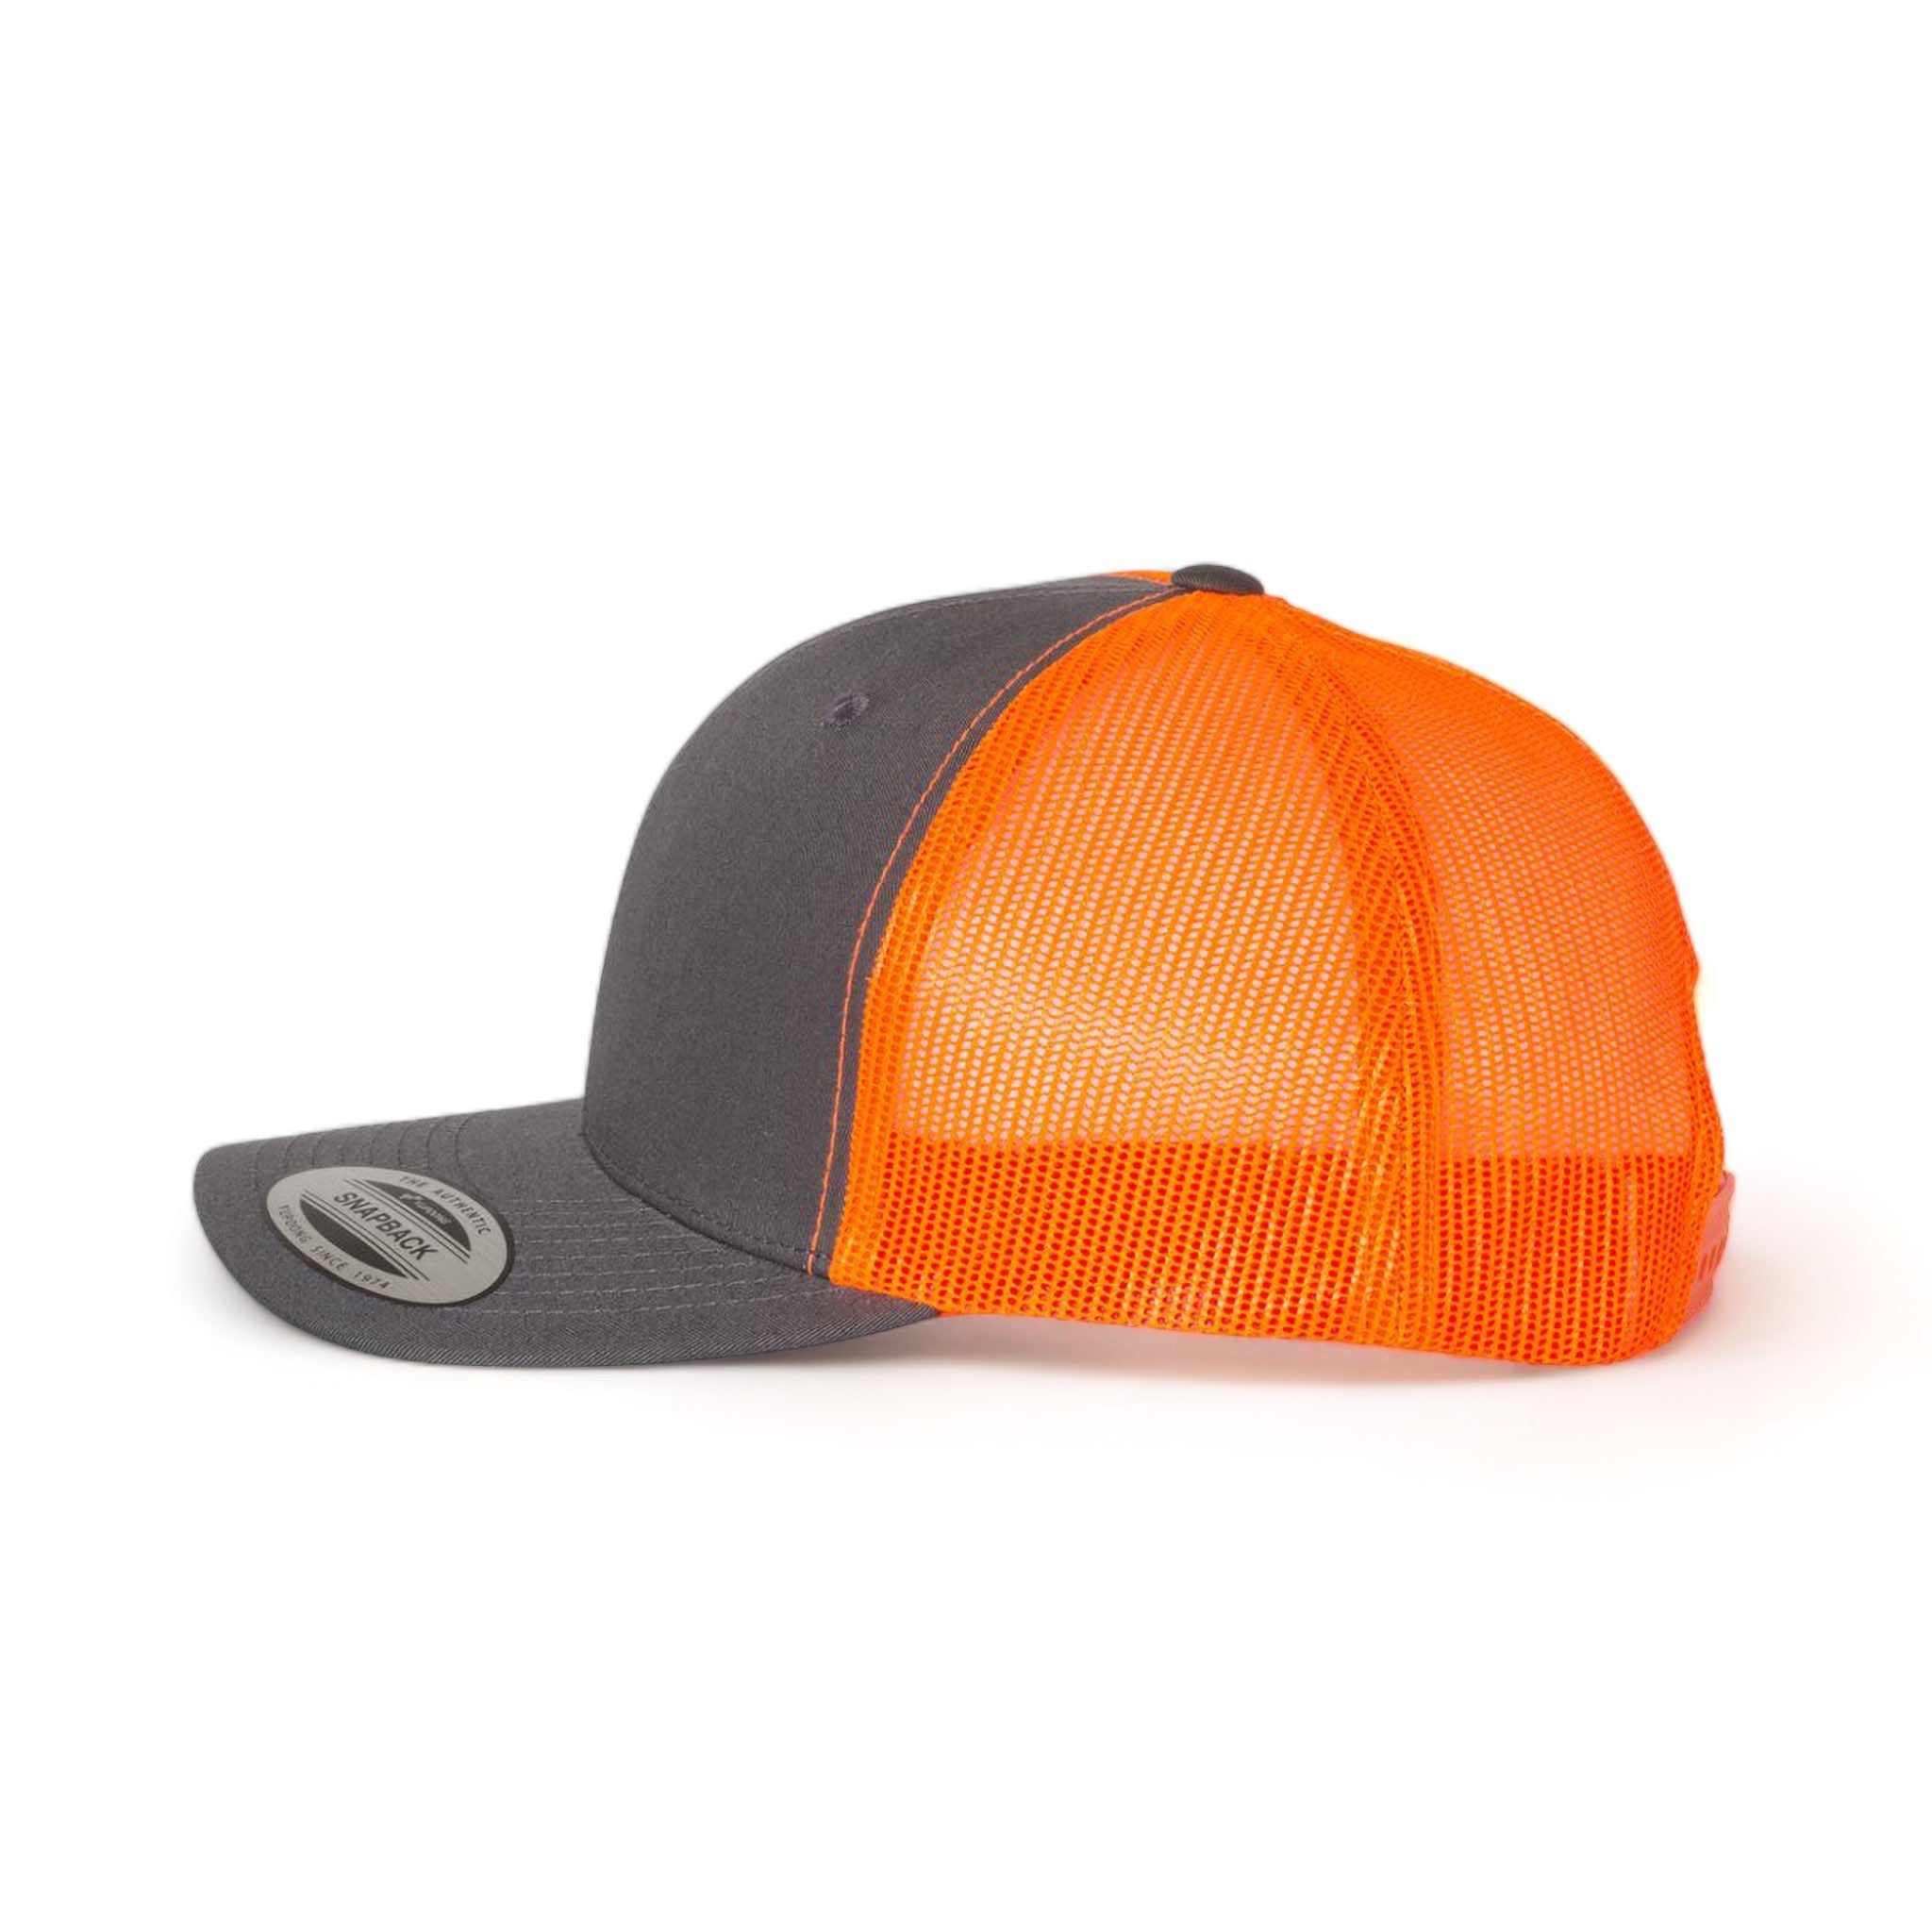 Side view of YP Classics 6606 custom hat in charcoal and neon orange